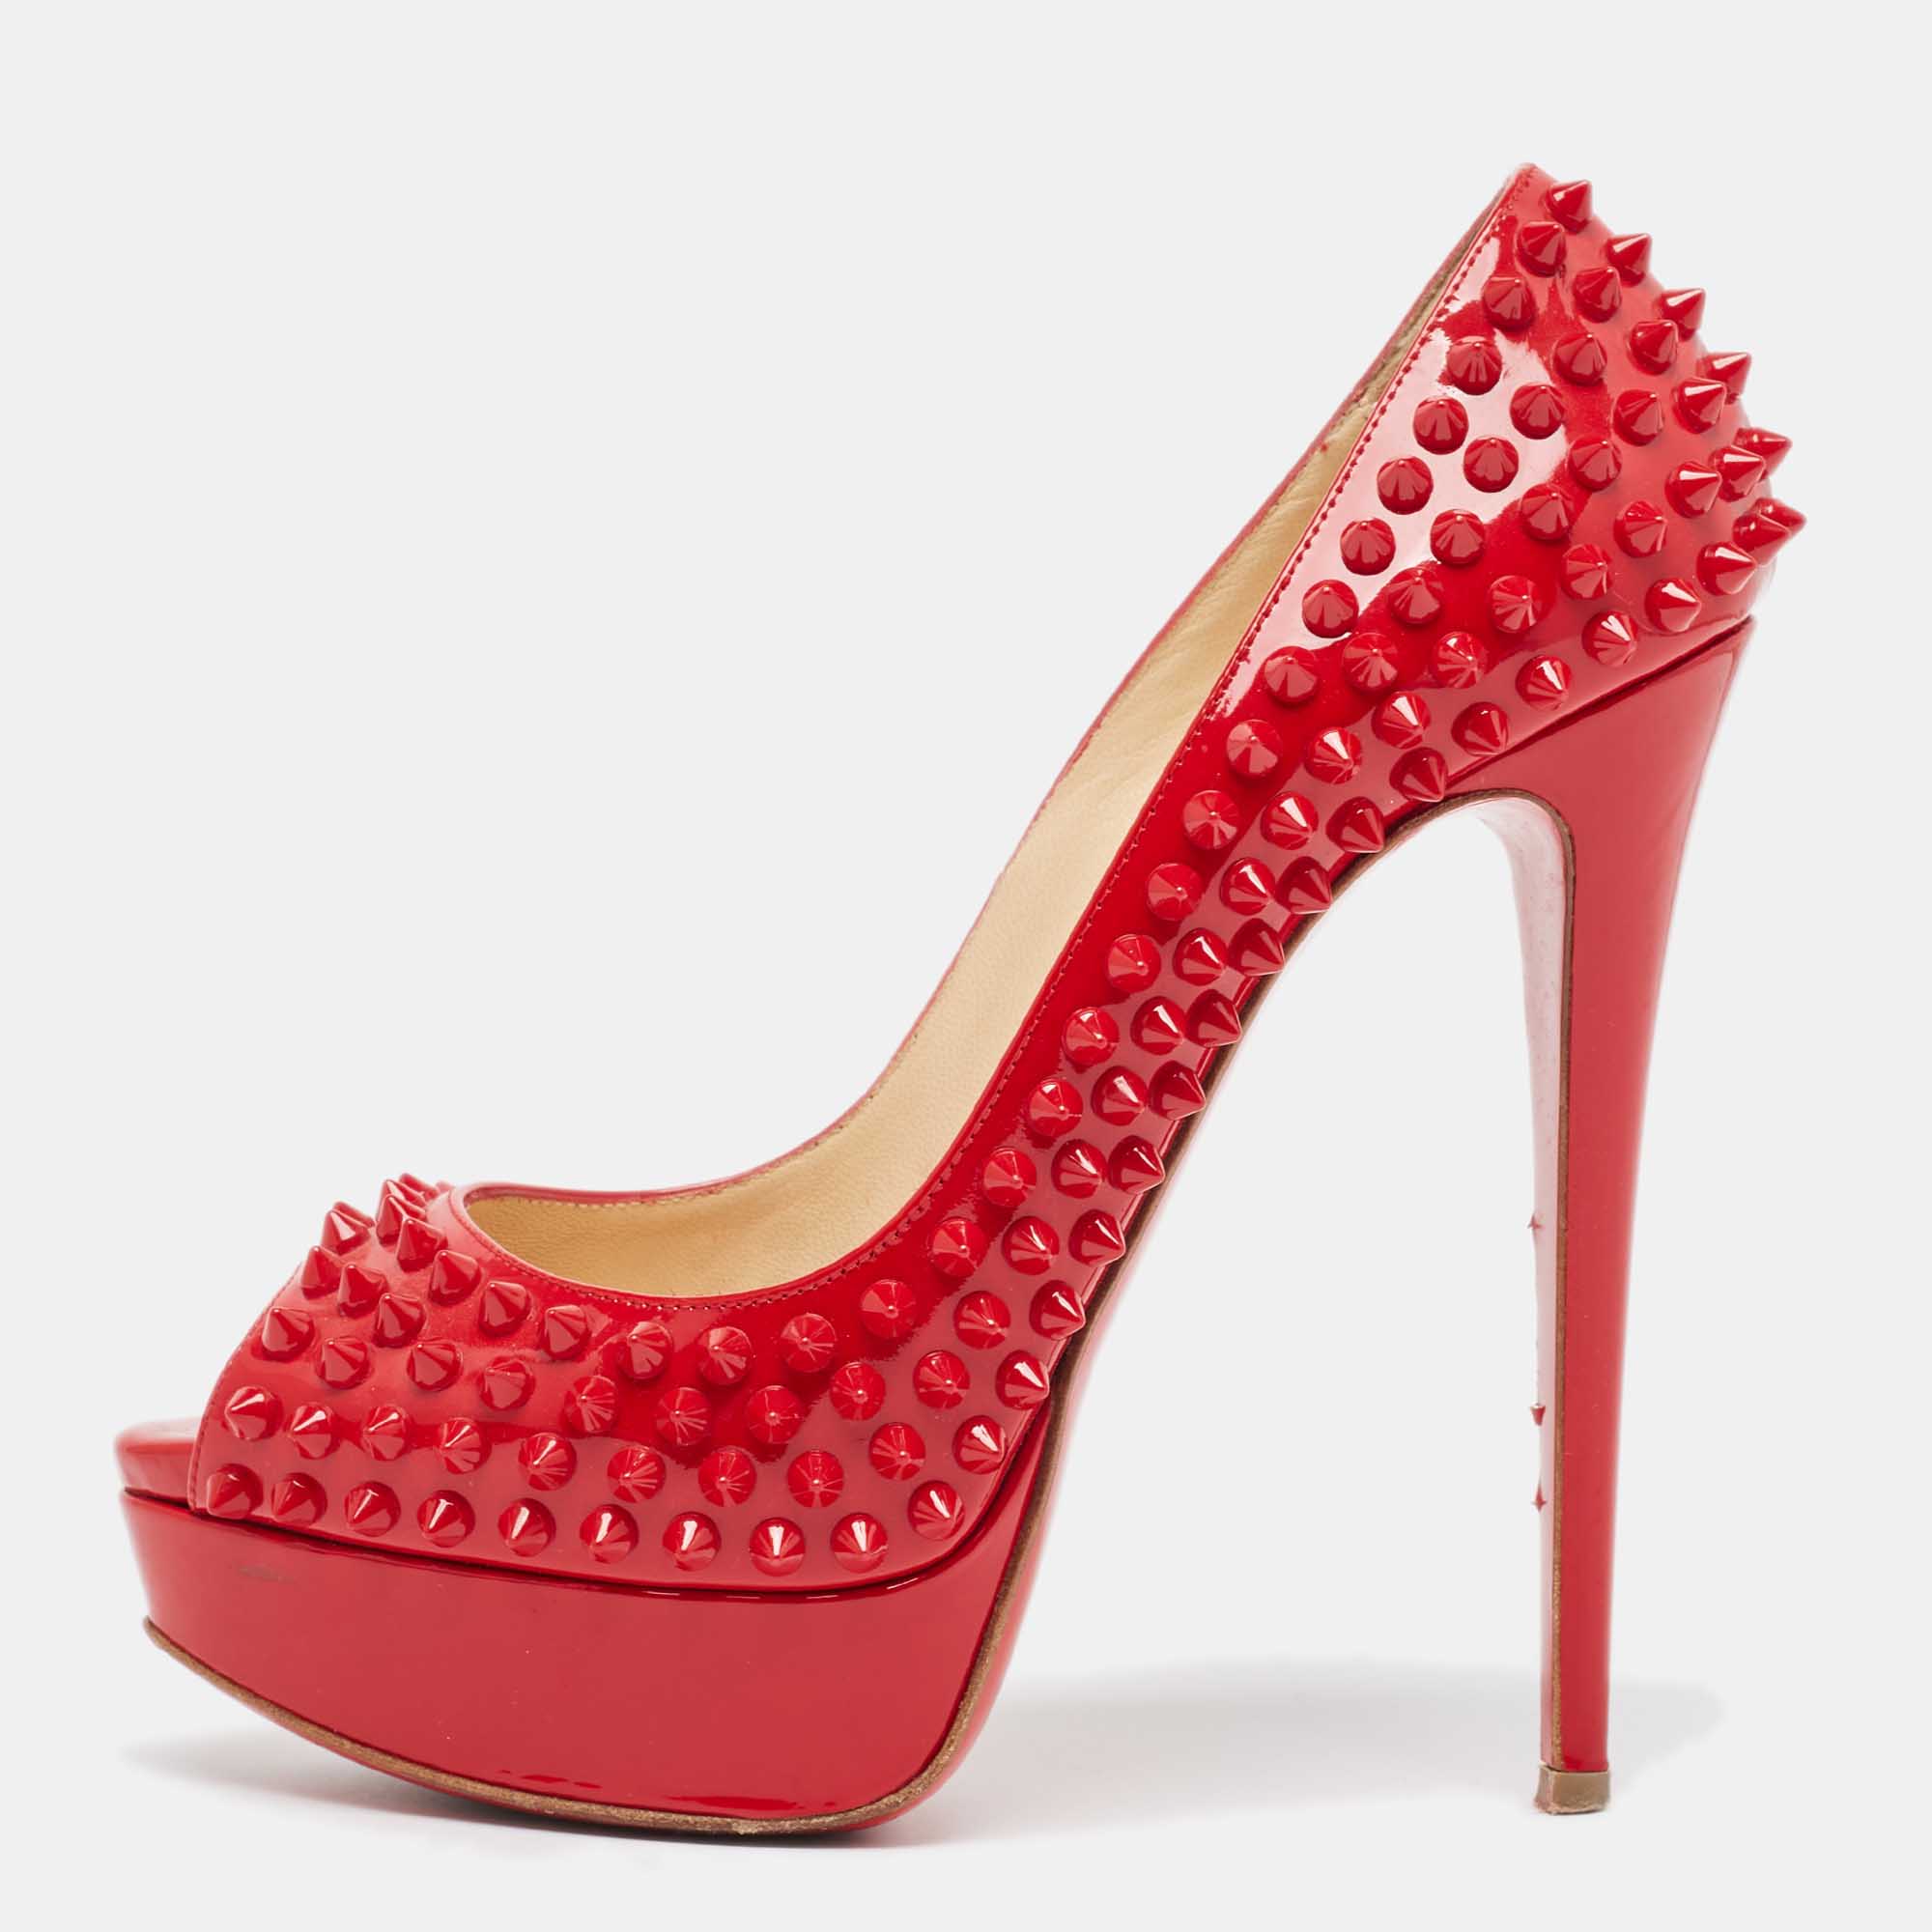 Christian louboutin red patent leather lady peep spikes pumps size 38